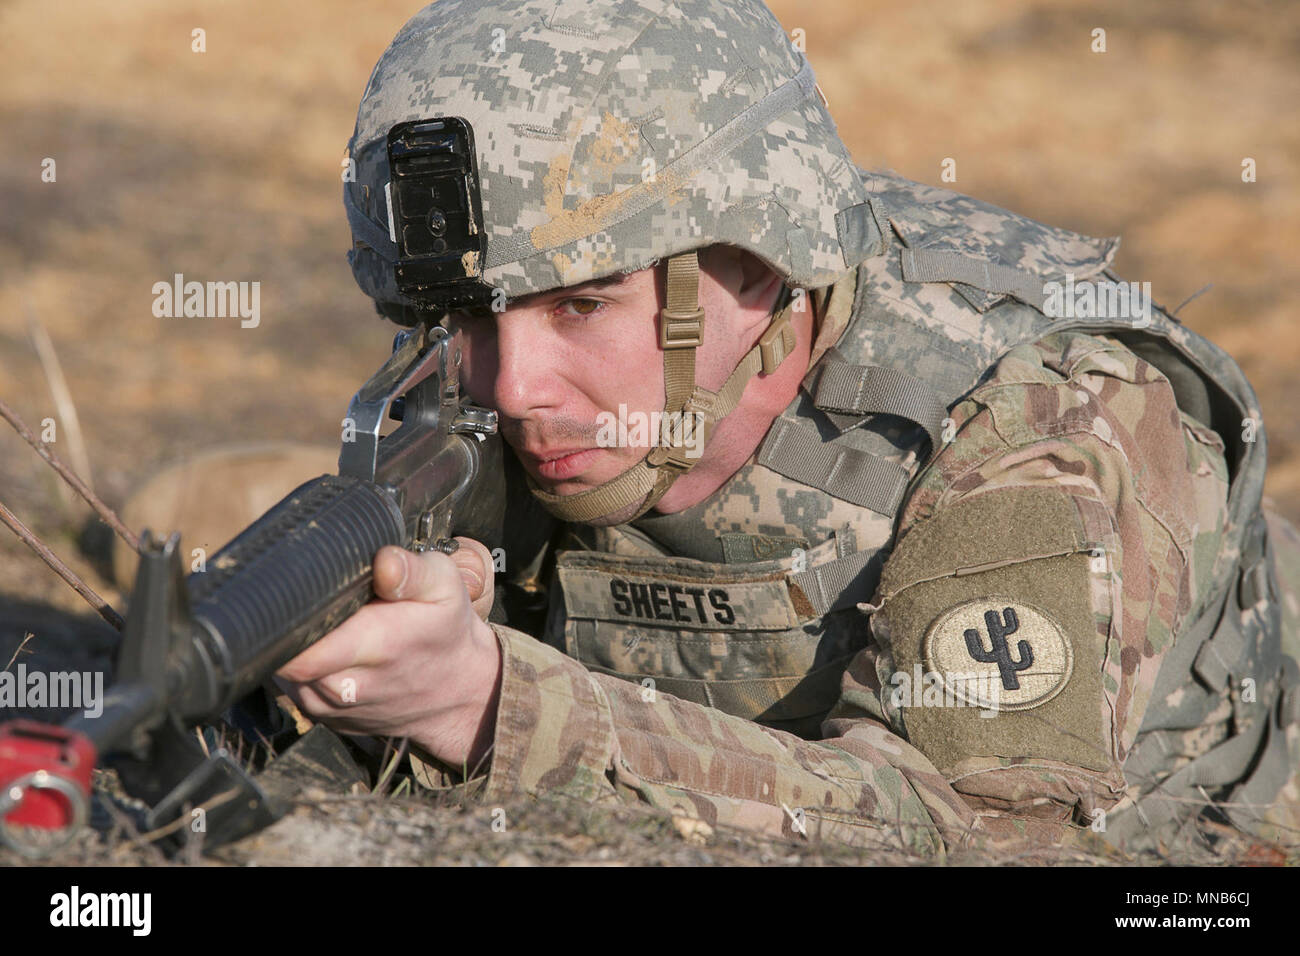 A U.S. Army Reserve Soldier aims his M16 rifle at a target, during a training event at Tactical Assembly Area Poorman during the Combat Support Training Exercise (CSTX) at Fort Knox, Kentucky, March 15, 2018. CSTX 78-18-03 is a training exercise that ensures America's Army Reserve units and Soldiers are trained and ready to deploy on short-notice and bring capable, combat-ready and lethal firepower in support of the Army and our joint partners anywhere in the world. (U.S. Army Reserve Stock Photo